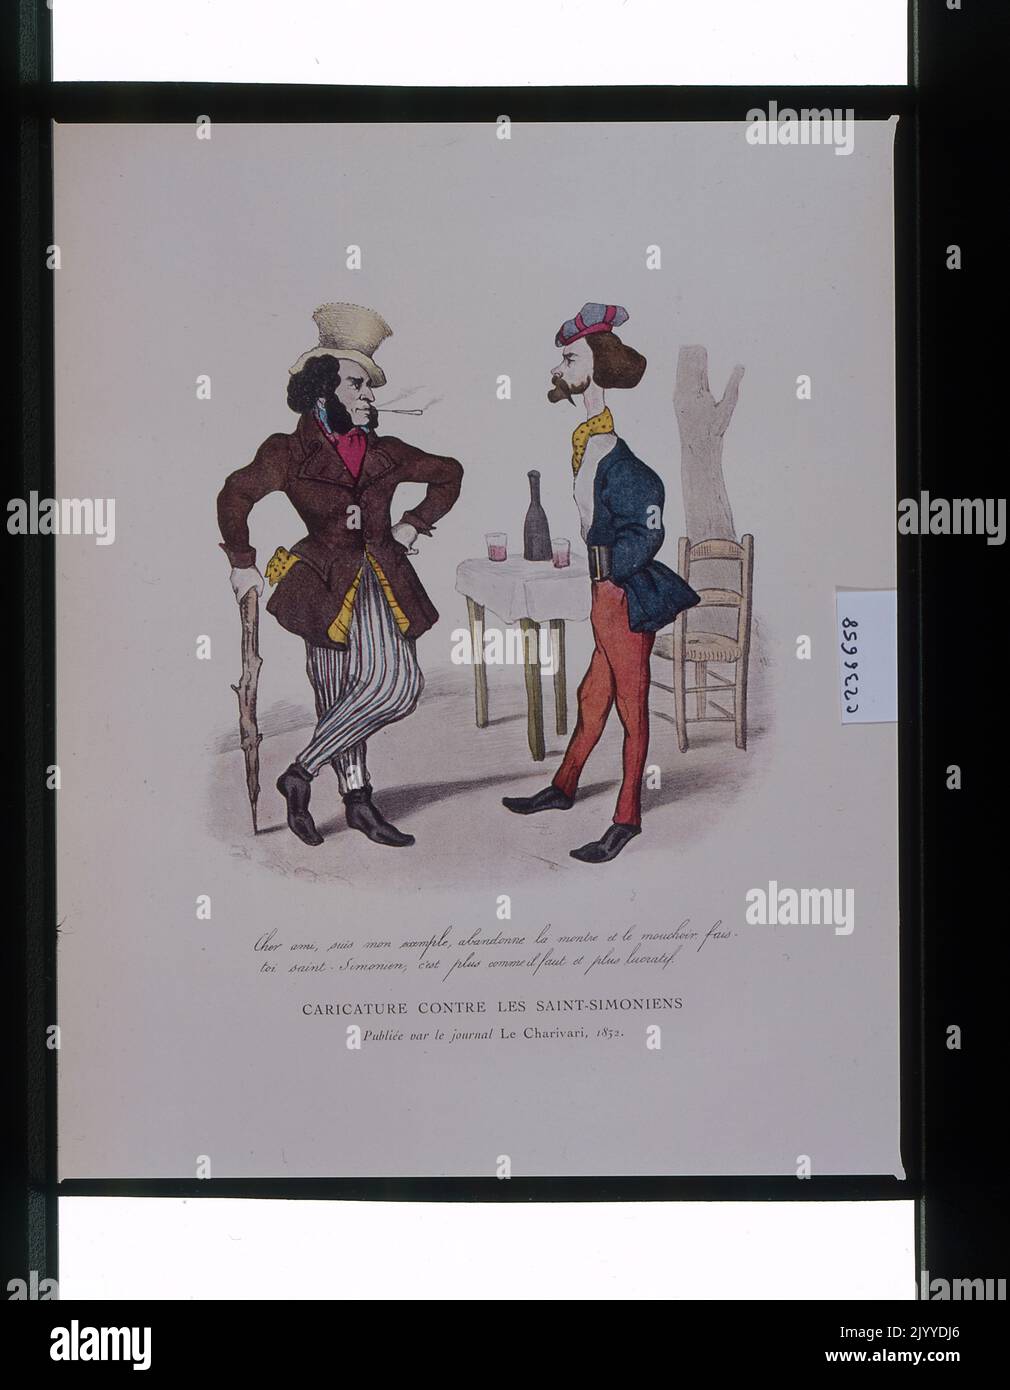 Satirical Illustration entitled 'Caricature against St, Simonien'. Two men wear thespian outfits. Stock Photo